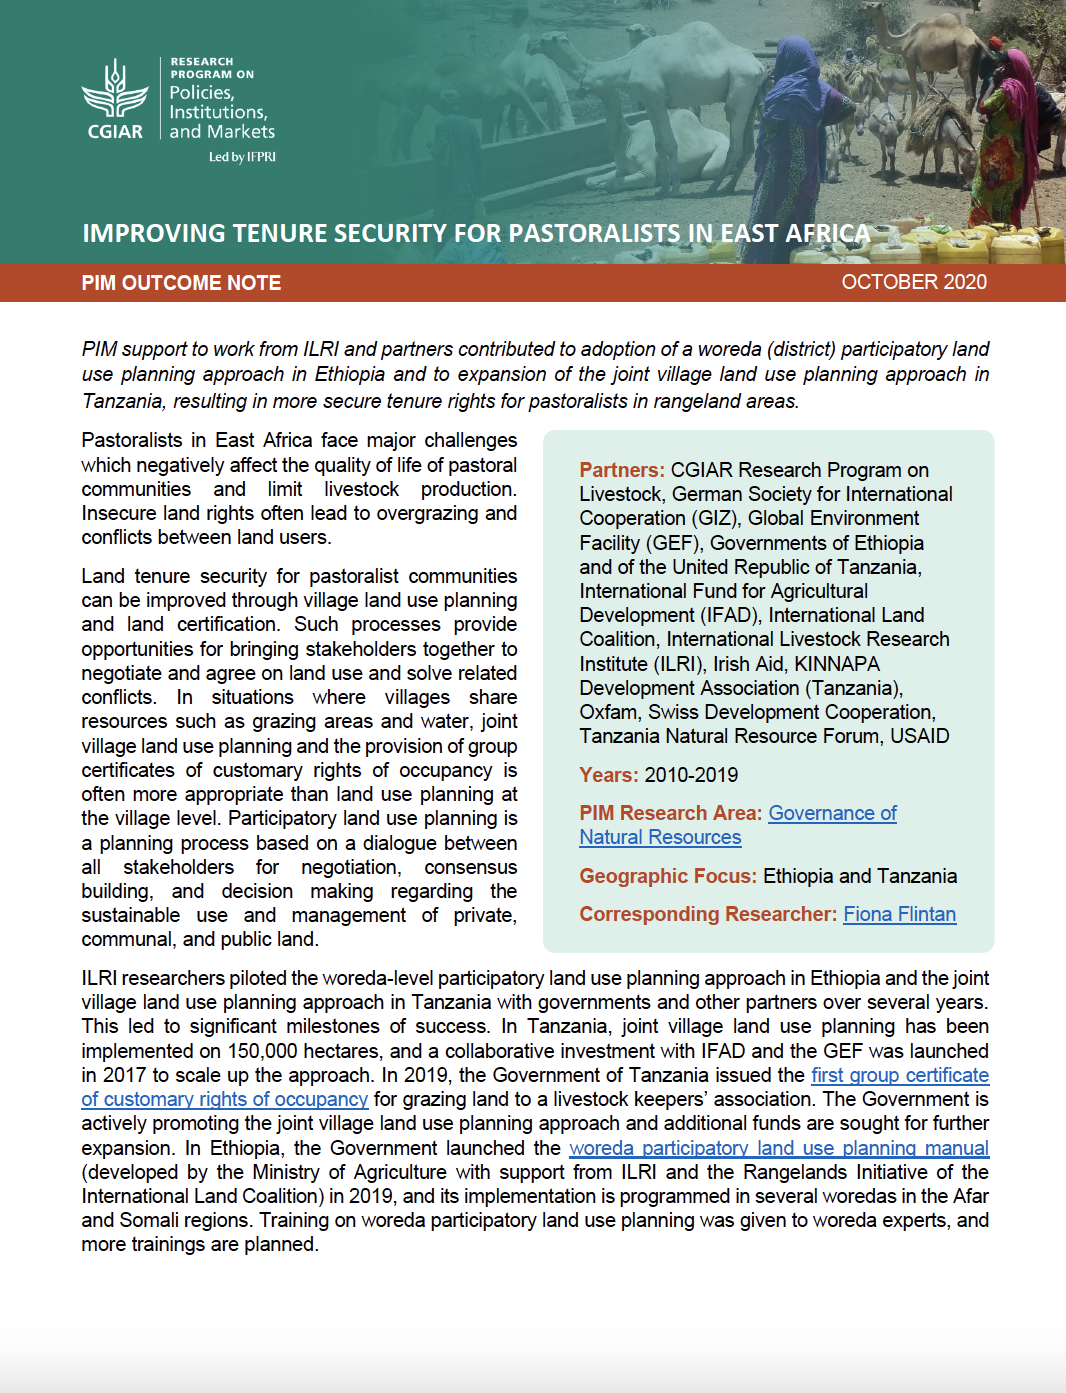 Improving tenure security for pastoralists in East Africa